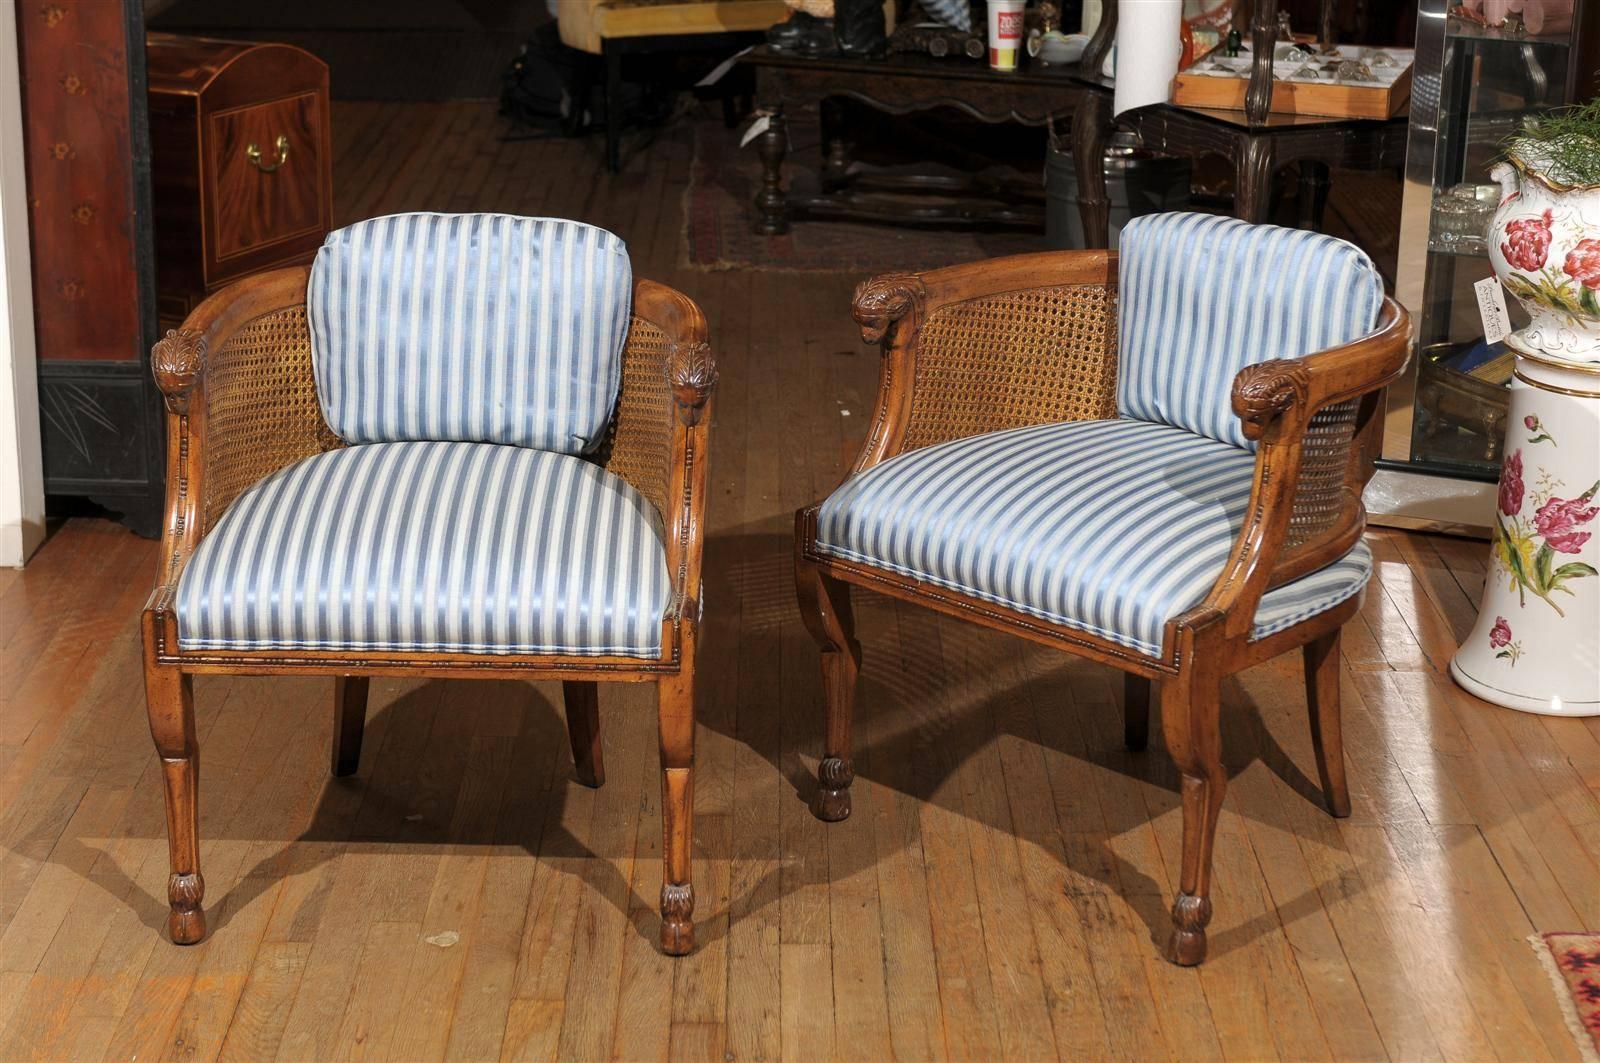 Pair of Mid-Century Regency style club chairs of solid walnut with carved ram's heads at the arms' handholds, cloven front feet and saber style back legs. The barrel back features the original cane. The seats are upholstered in a light and dark blue